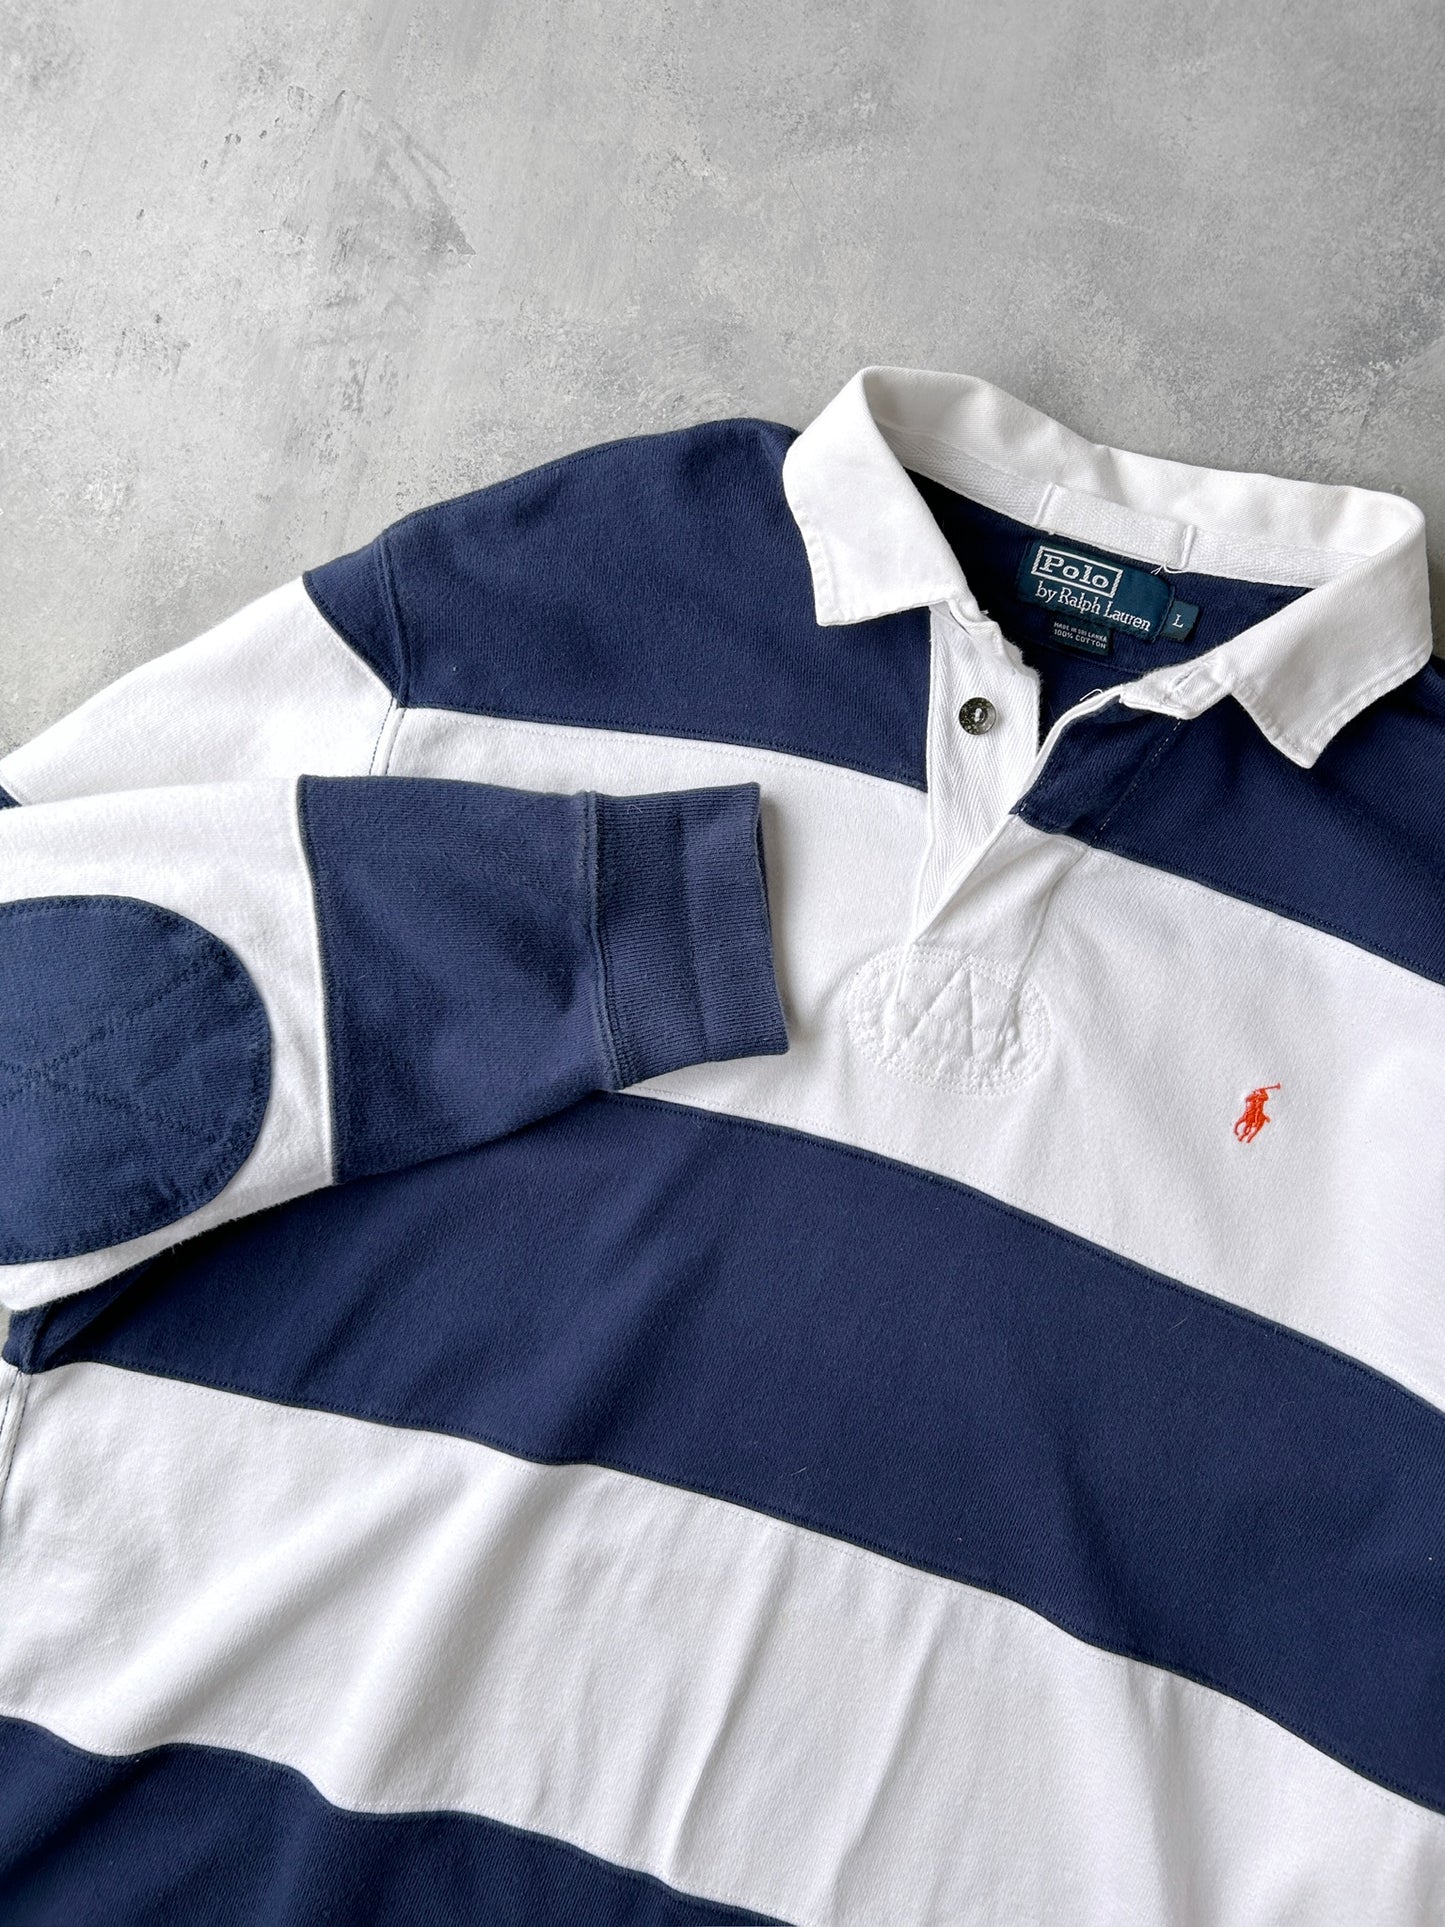 Polo Ralph Lauren Rugby Shirt 90's - Large